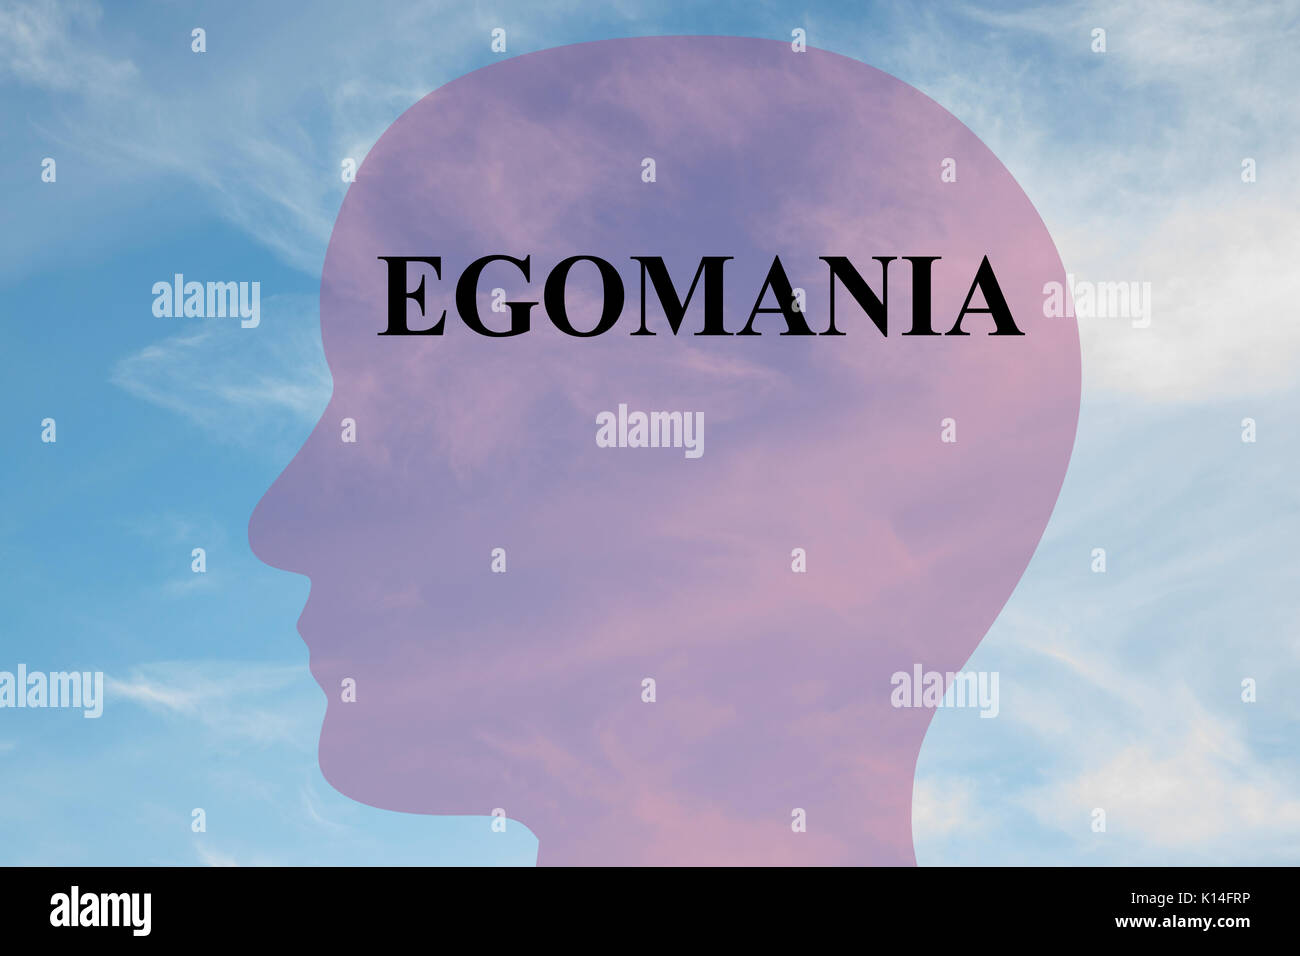 Render illustration of 'EGOMANIA' title on head silhouette, with cloudy sky as a background. Stock Photo